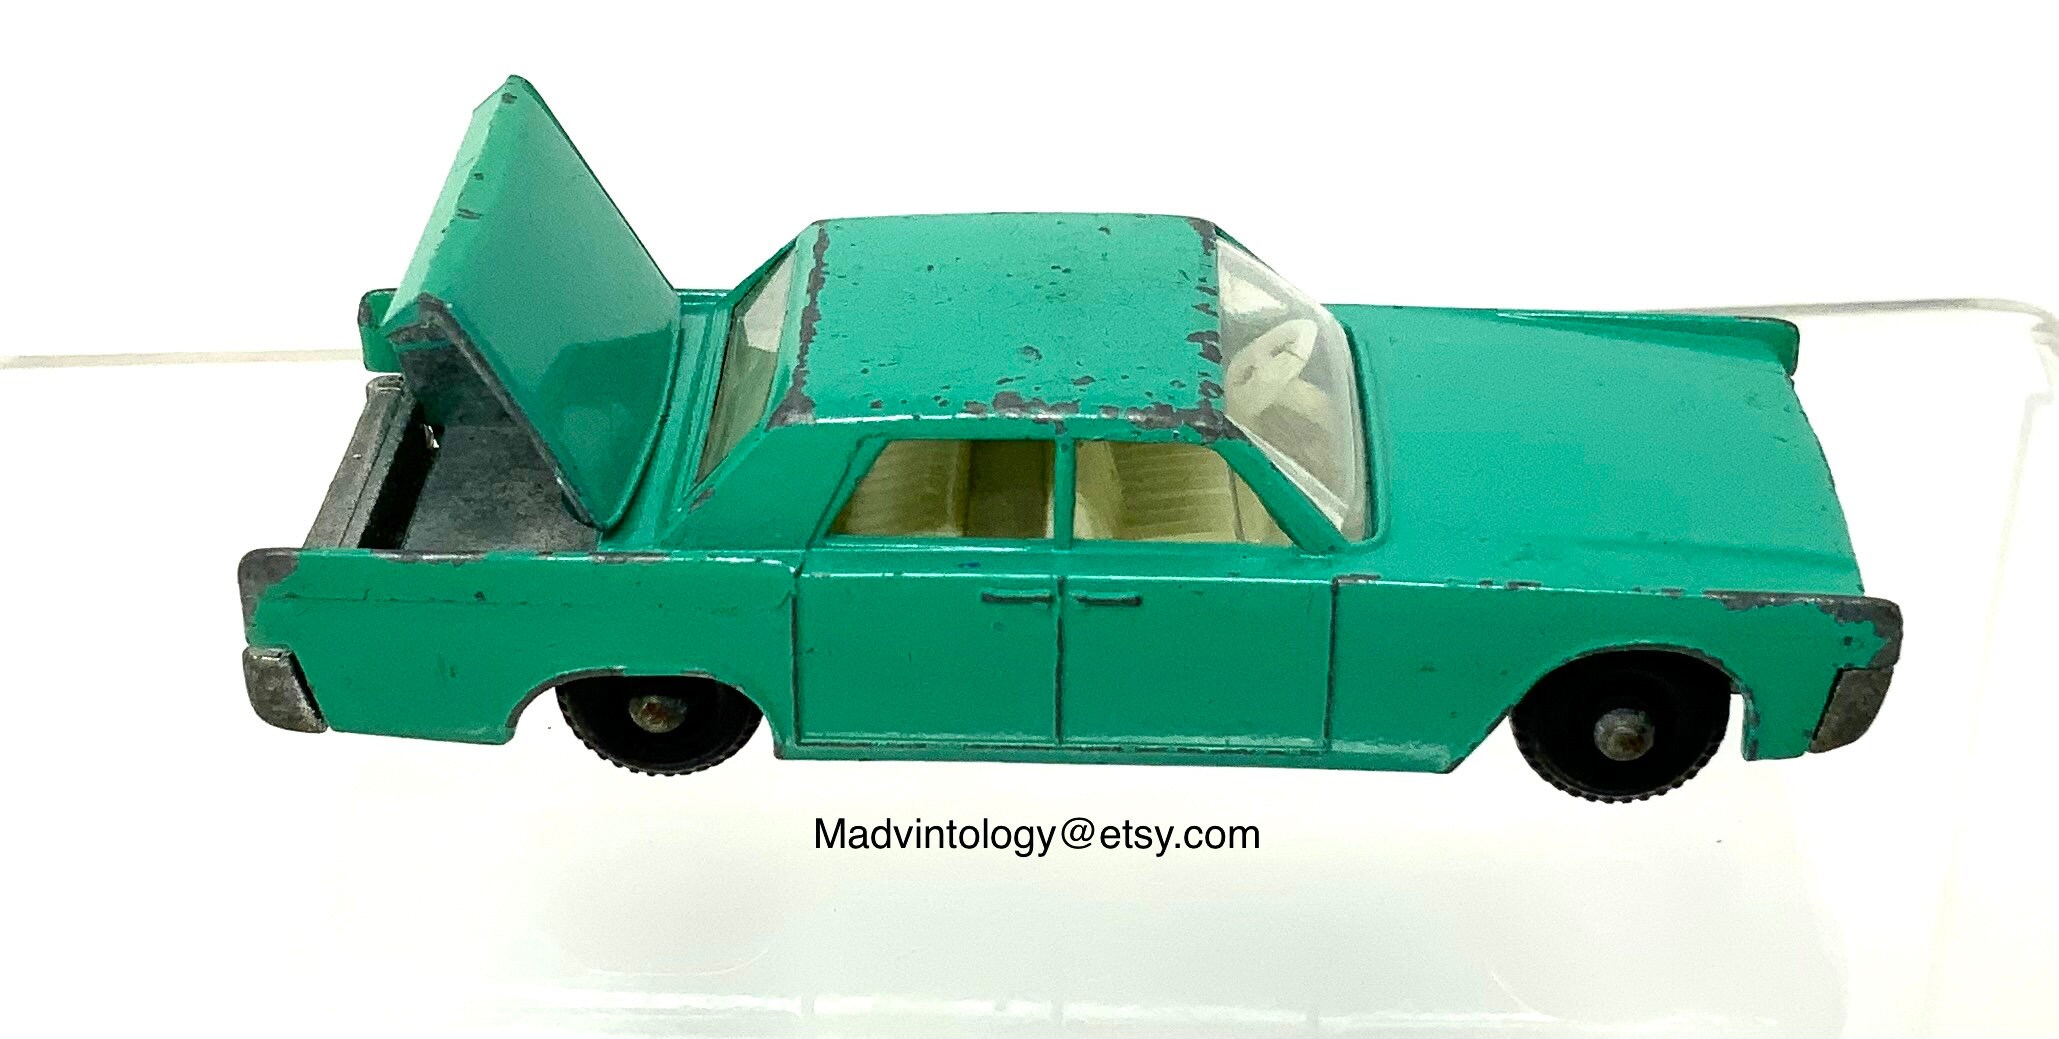 Matchbox series No. 31 Lincoln Continental Like 